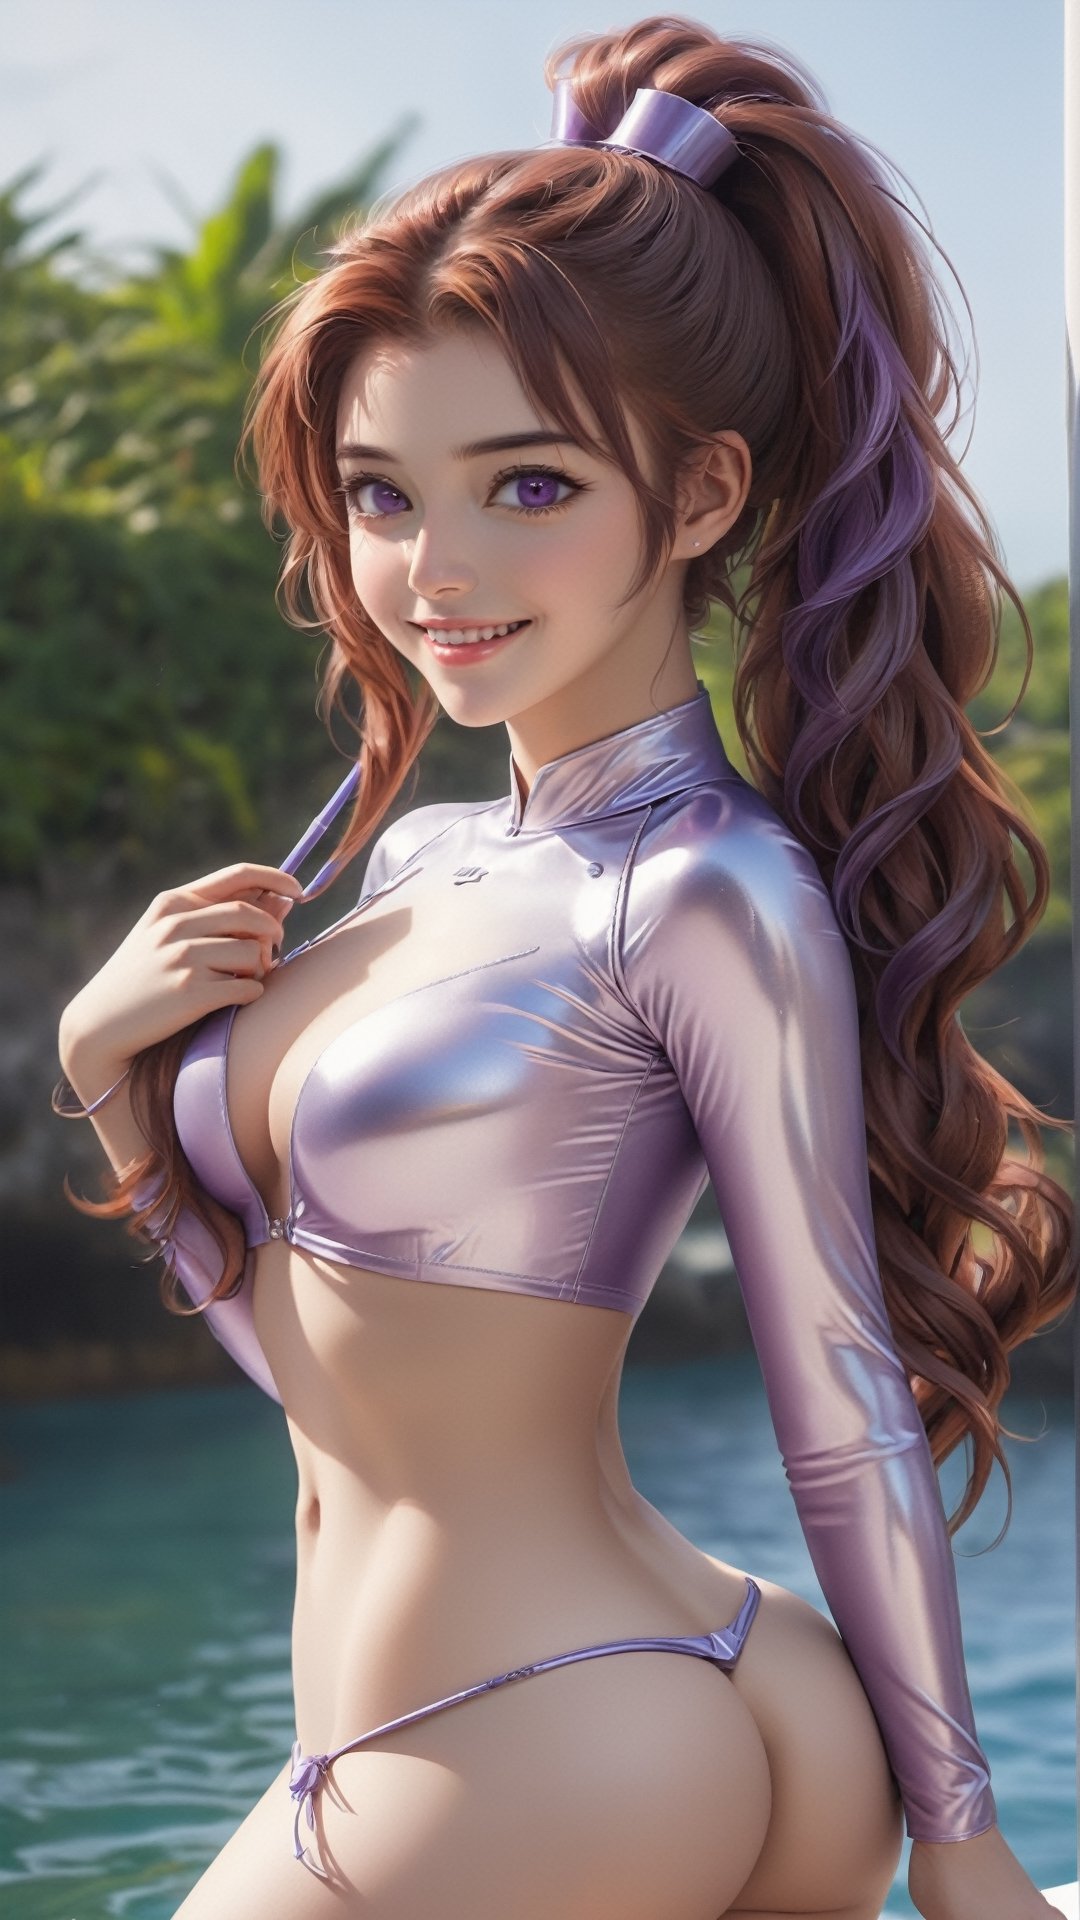 ((masterpiece)),  Best Quality,  absurderes,  ultra-detailliert, Golden ratio,  Super cute girl , 1girl,  Mature girl,  Idol girl,  Super beautiful girl with very beautiful purple eyes,  Beautiful shiny brown multicolored hair,  High Ponytail,  Nice and sexy body,  Slim body,  Perfect body
, smile, (nsfw, nude, thigh, slim body:1.3), sea, outdoor, (photorealistic, realistic:1.5), 